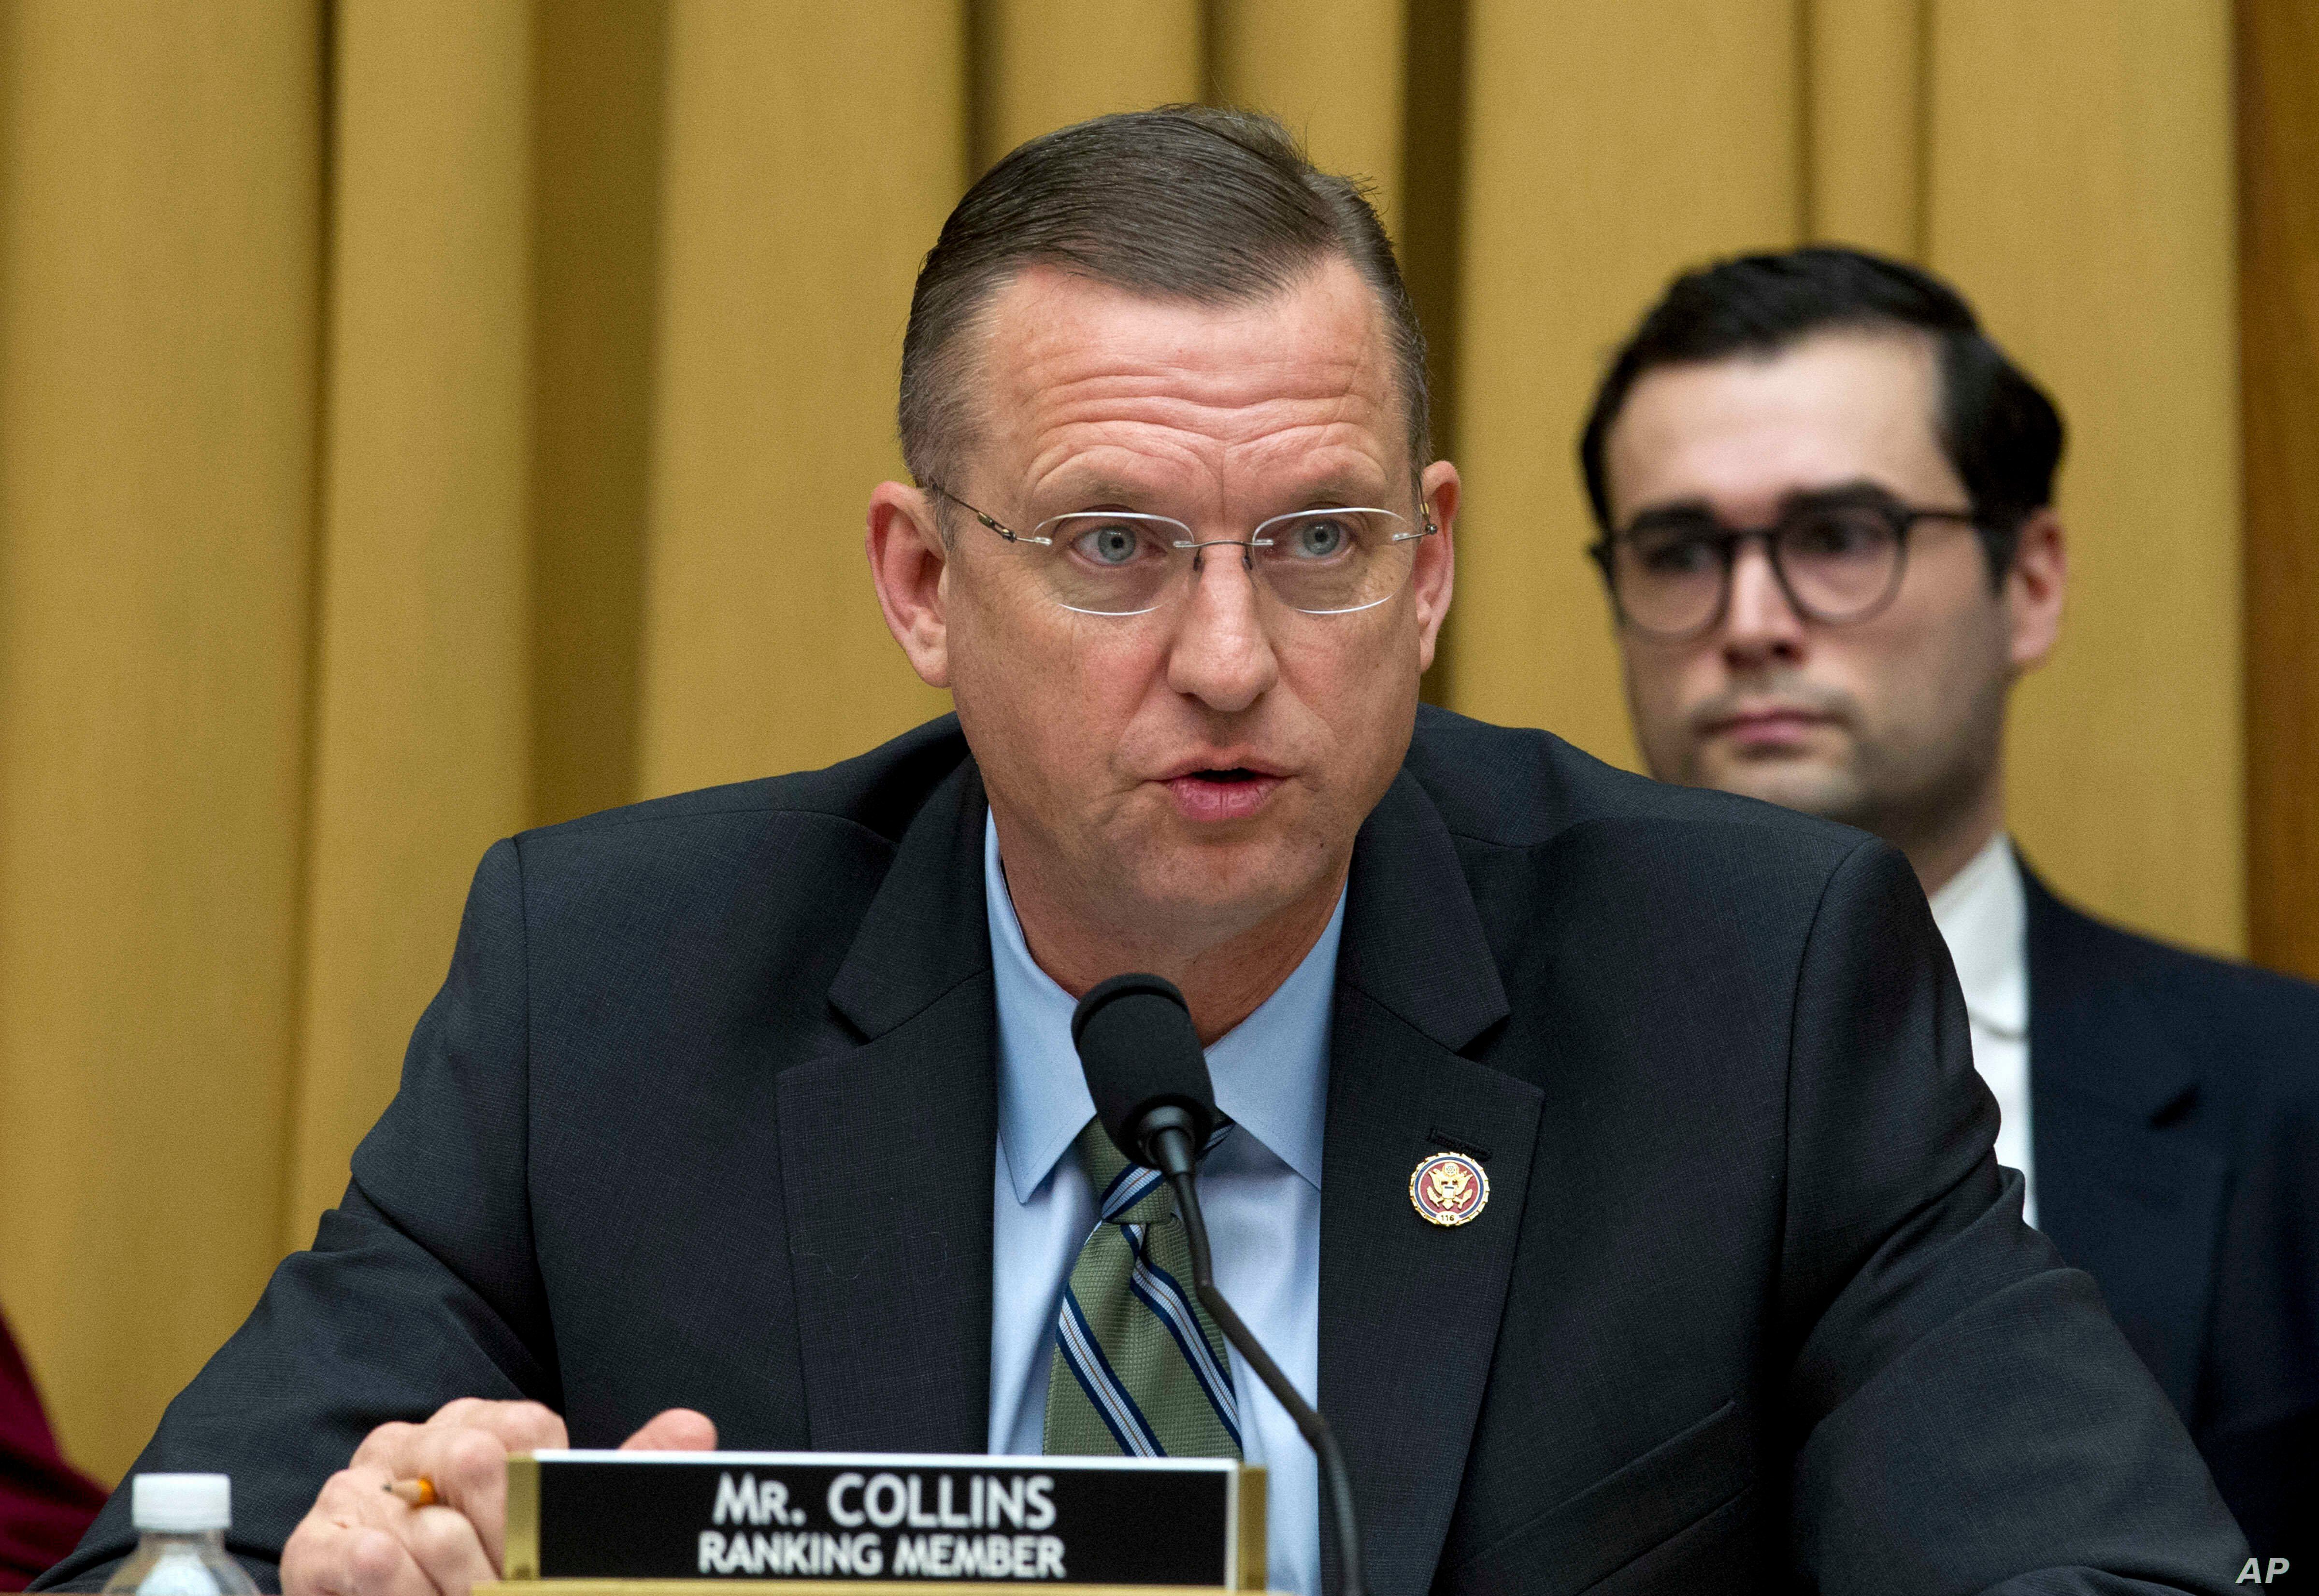 House Judiciary Committee Ranking Member Rep. Doug Collins, R-Ga., speaks during a House Judiciary Committee debate to subpoena Acting Attorney General Matthew Whitaker, on Capitol Hill in Washington, Feb. 7, 2019.